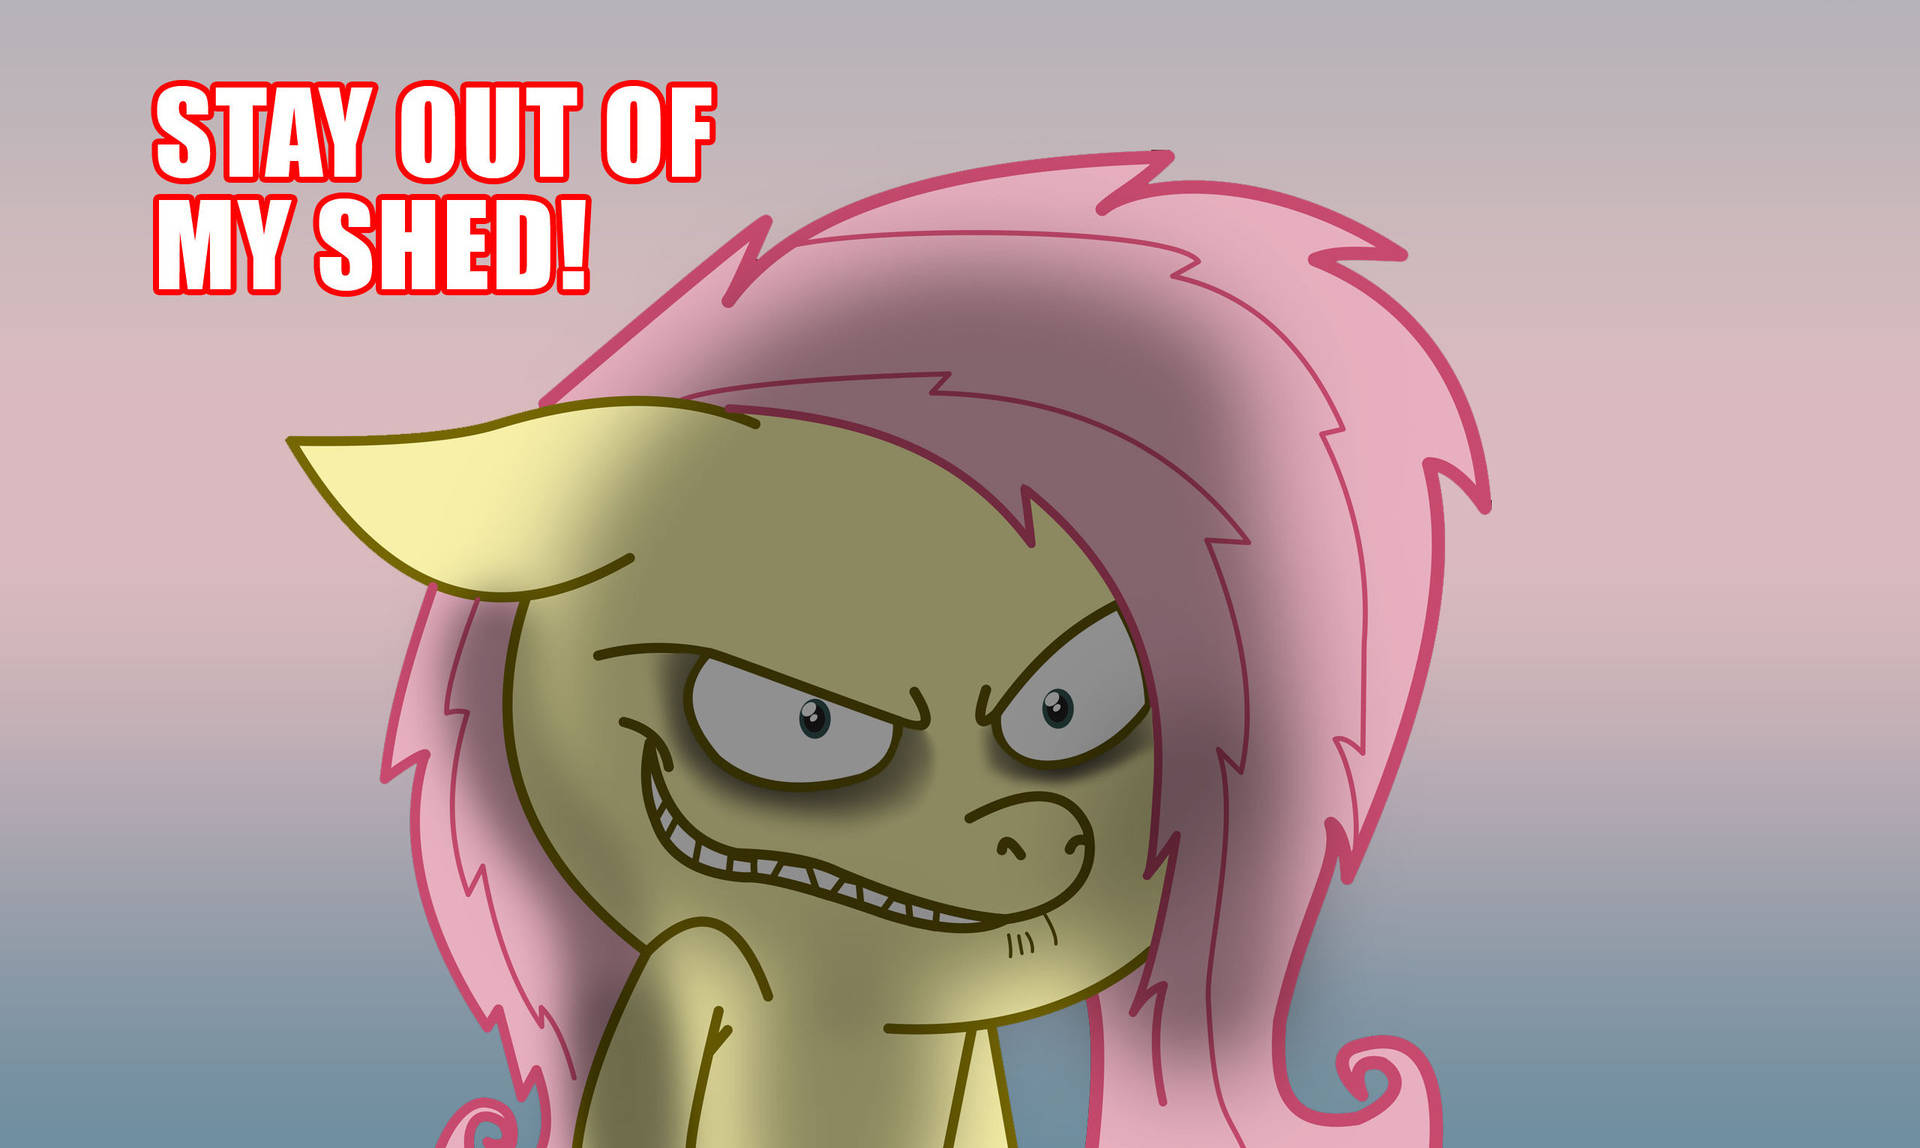 My Little Pony Fluttercry Meme. Animal with sharp teeth that says 